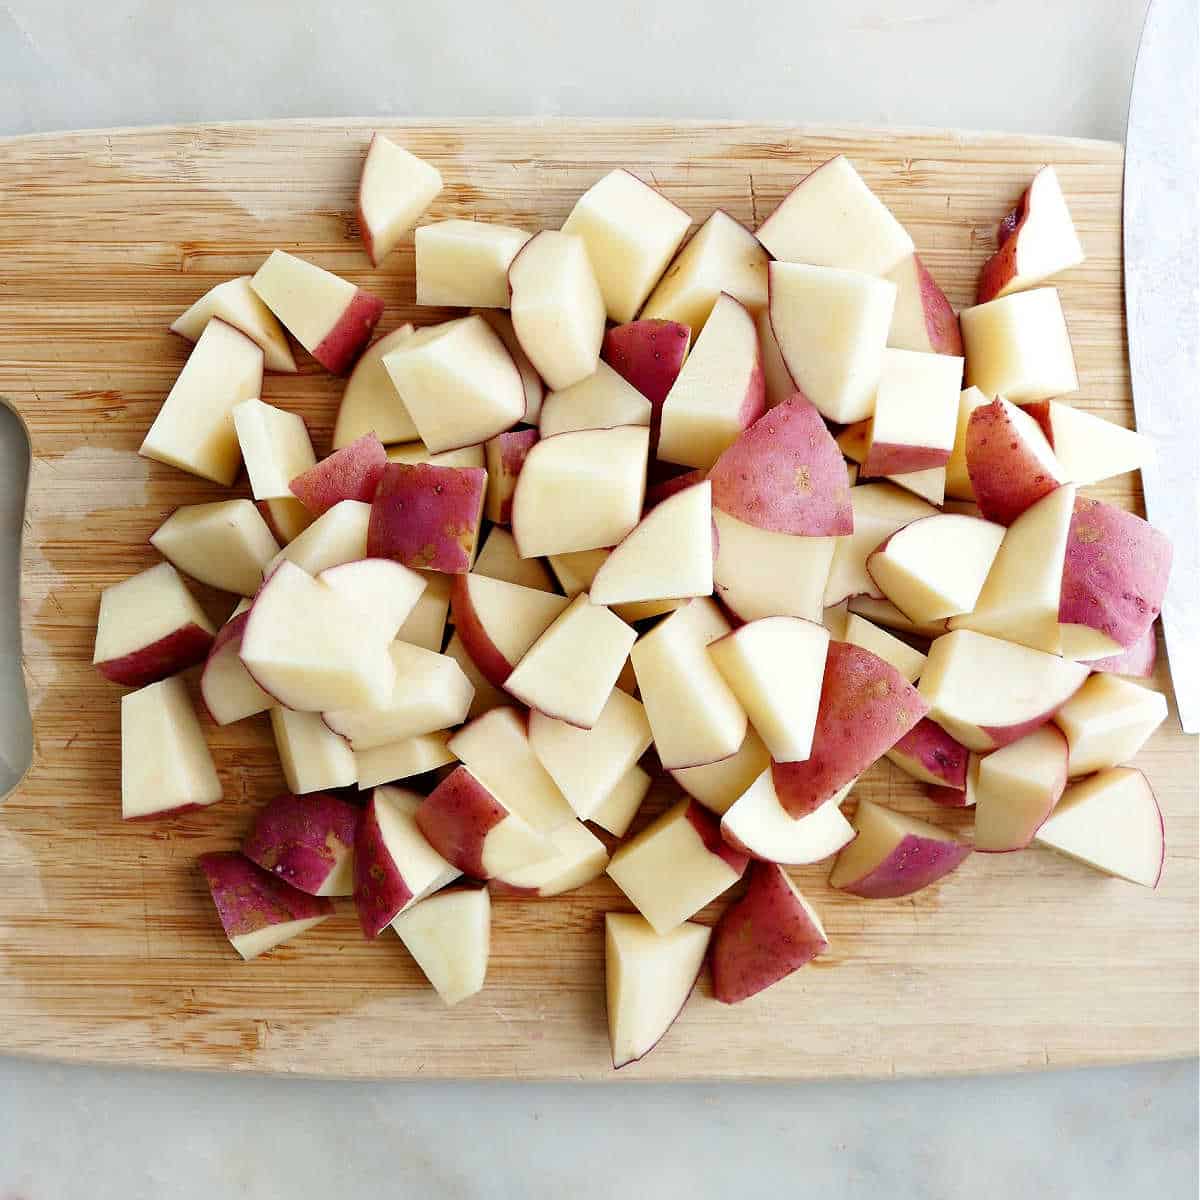 red potatoes cut into chunks on a bamboo cutting board